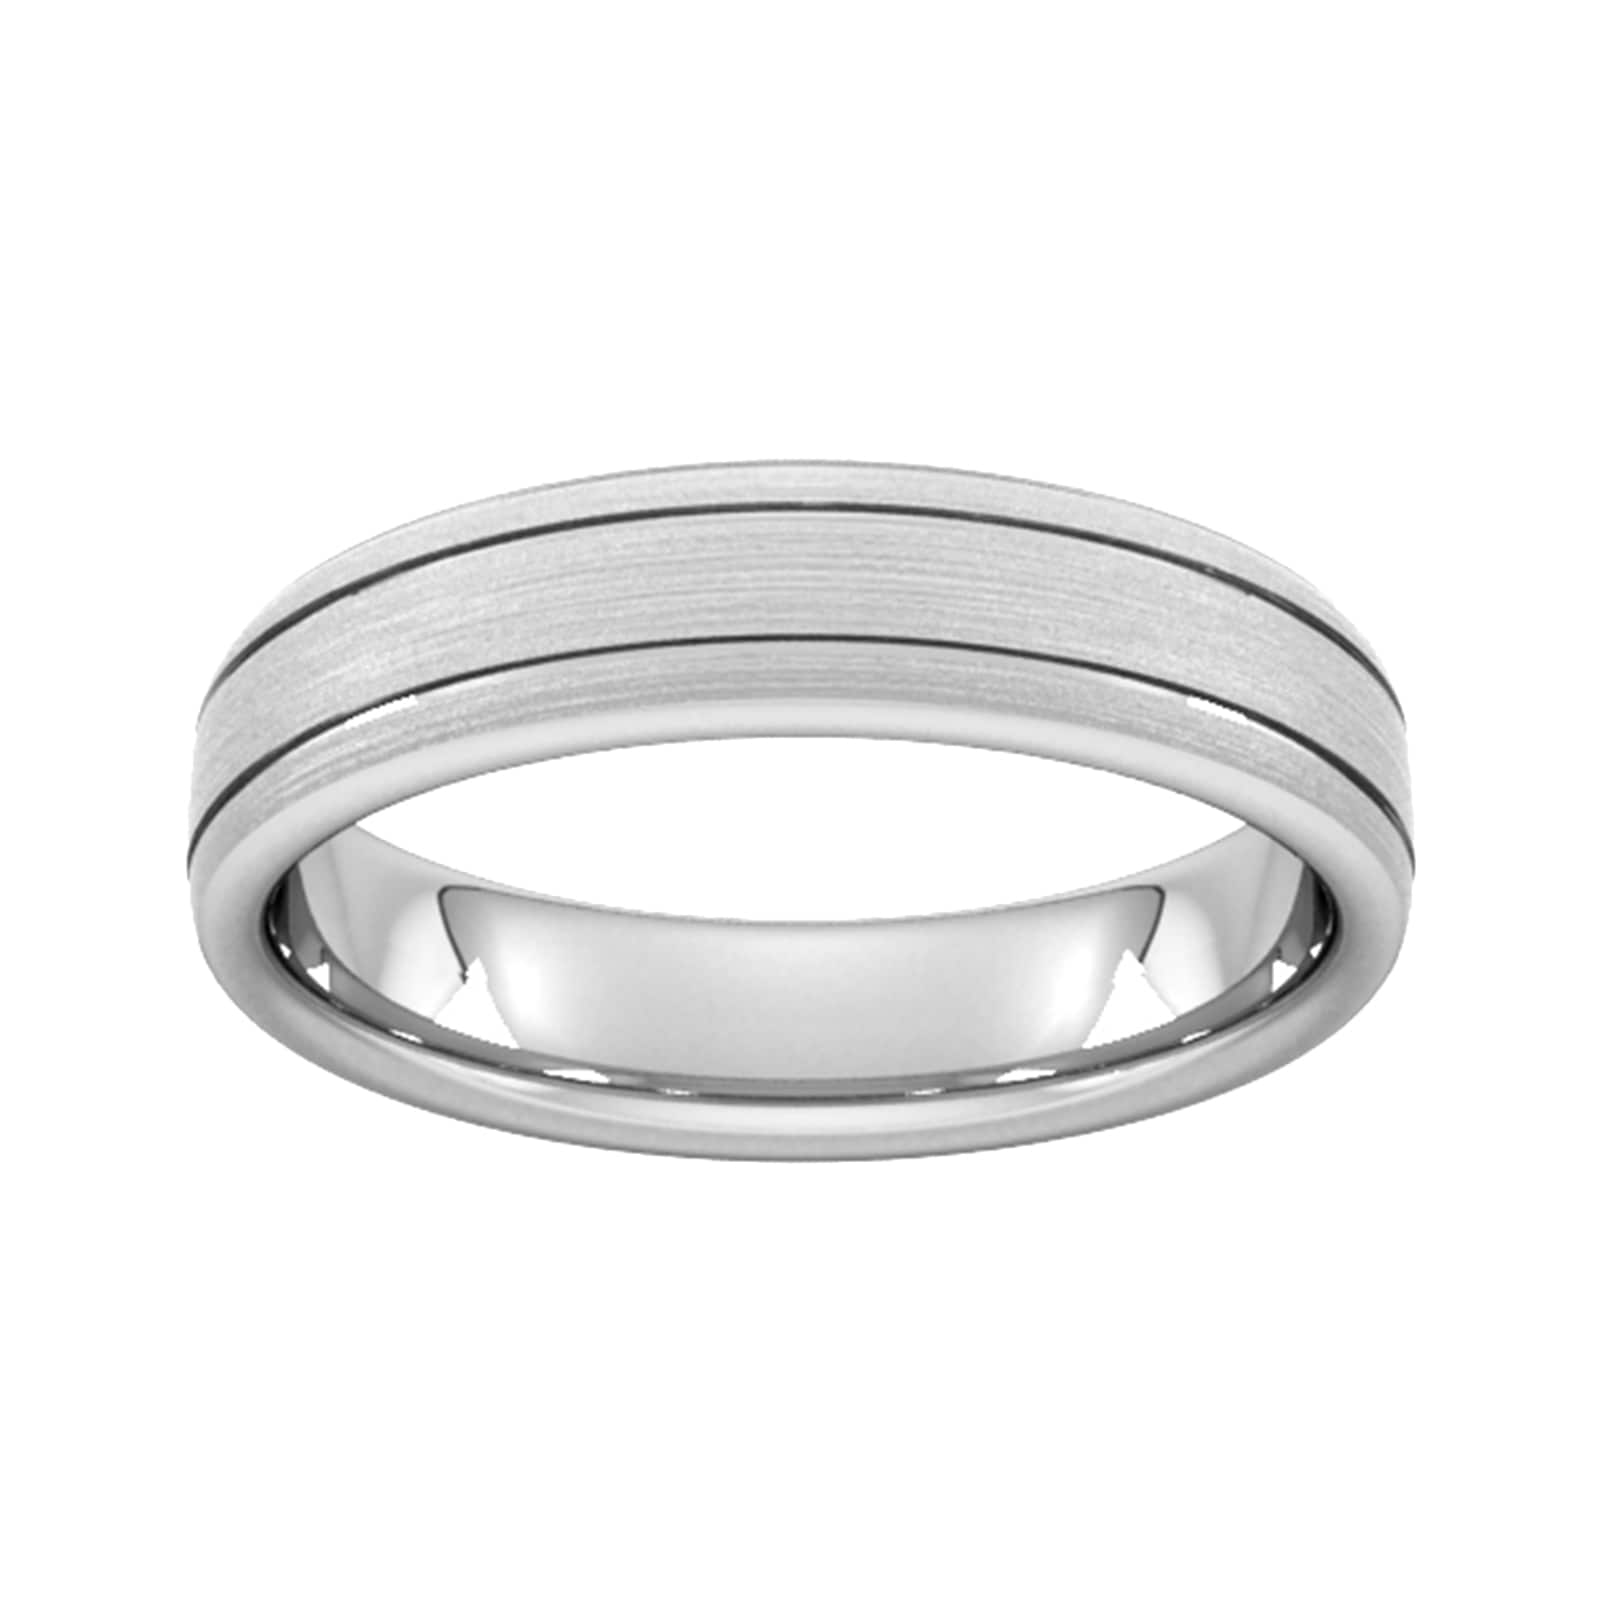 5mm Traditional Court Heavy Matt Finish With Double Grooves Wedding Ring In 950 Palladium - Ring Size W